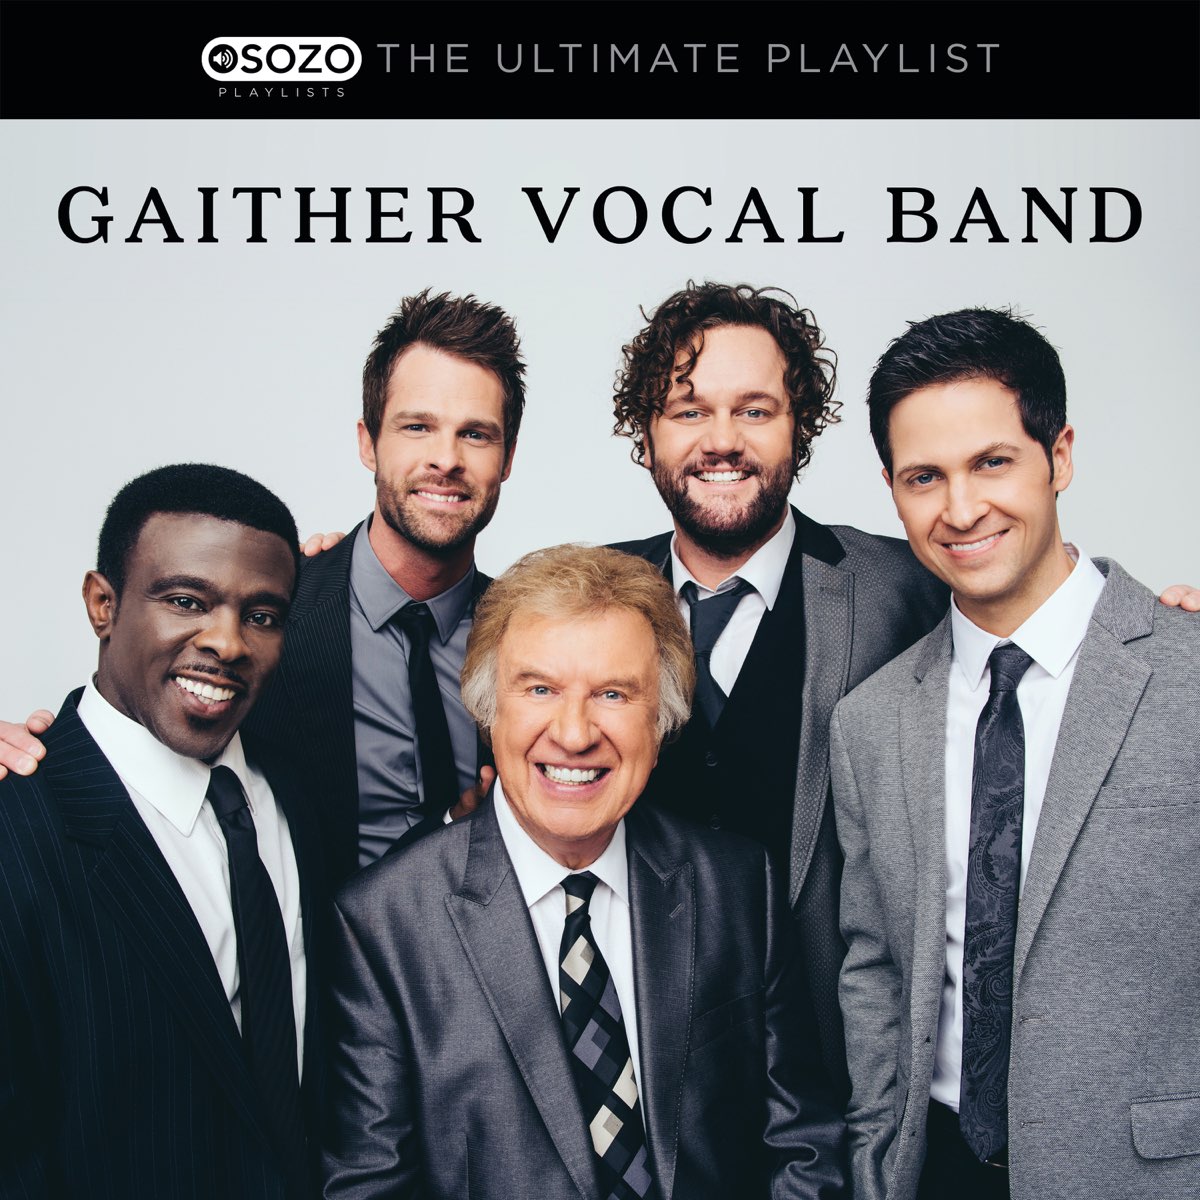 Ultimate playlist. Gaither Vocal Band. Вокал бэнд. Lovin' Life Gaither Vocal Band. Вокал бэнд матрица.